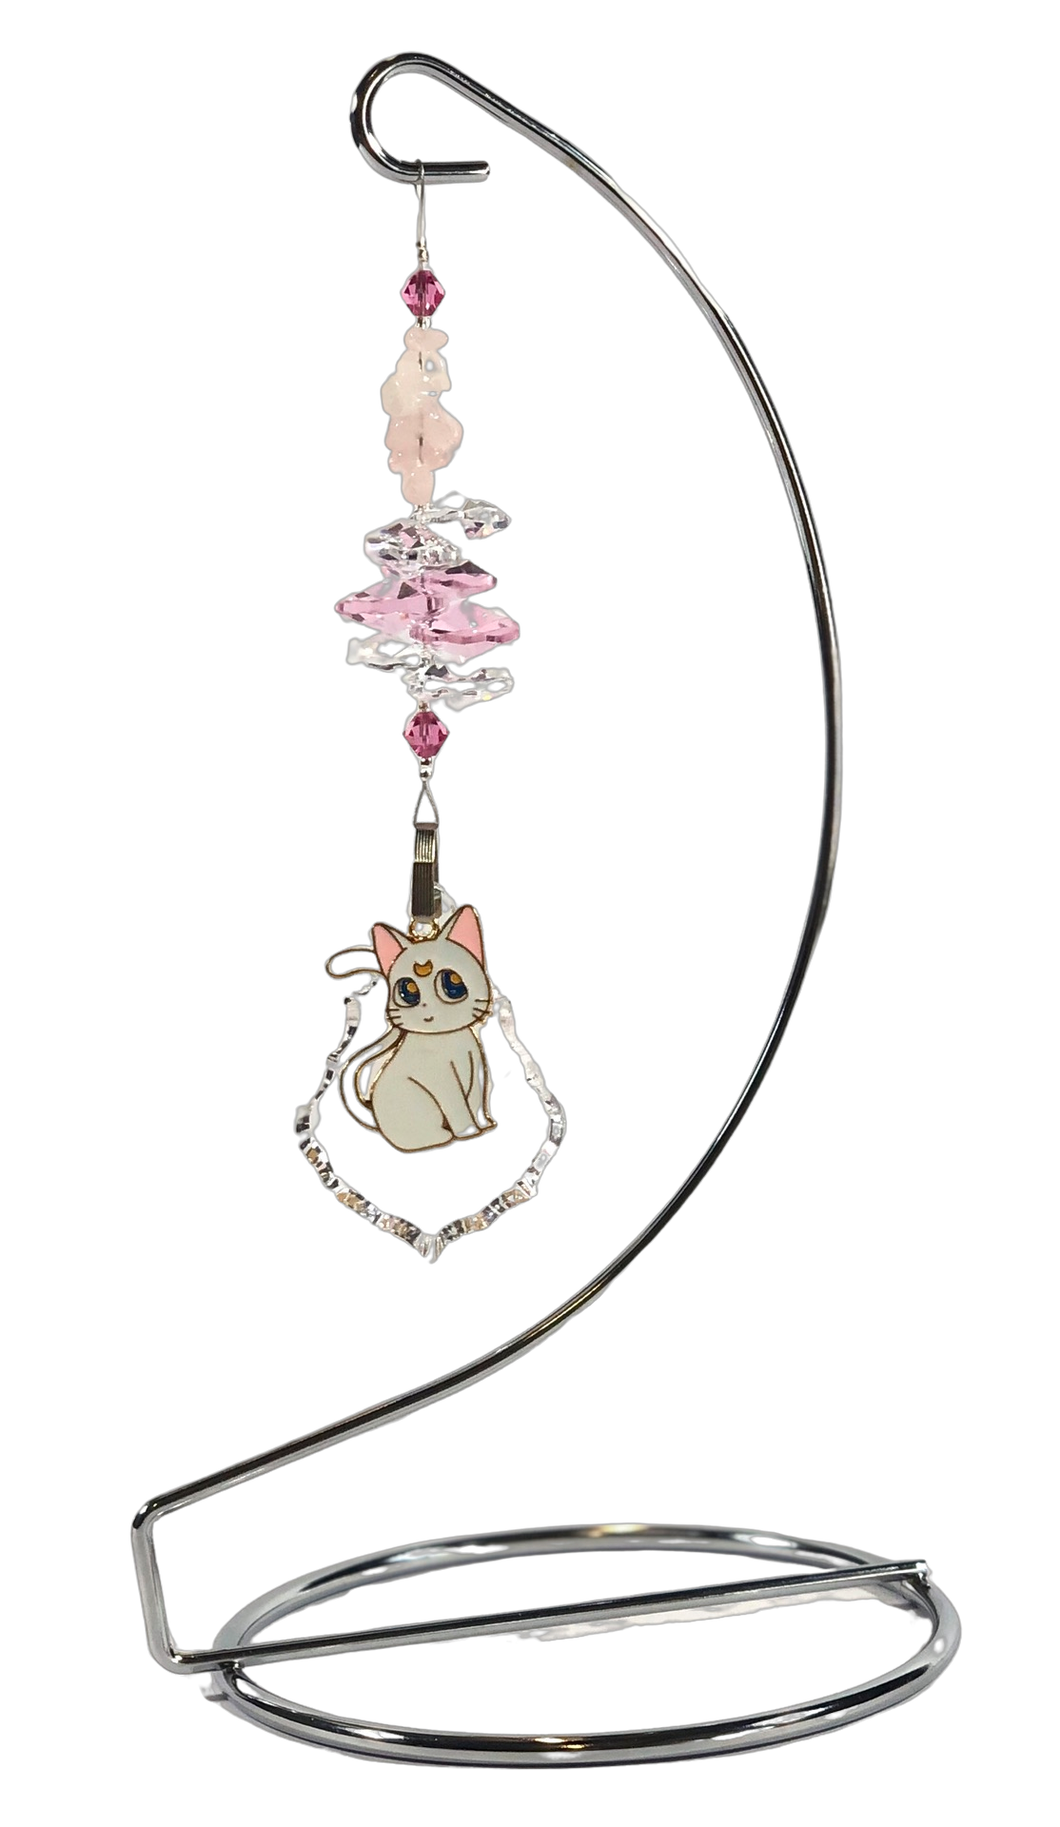 Sailor Moon - Artemis crystal suncatcher is decorated with rose quartz gemstones and come on this amazing stand.